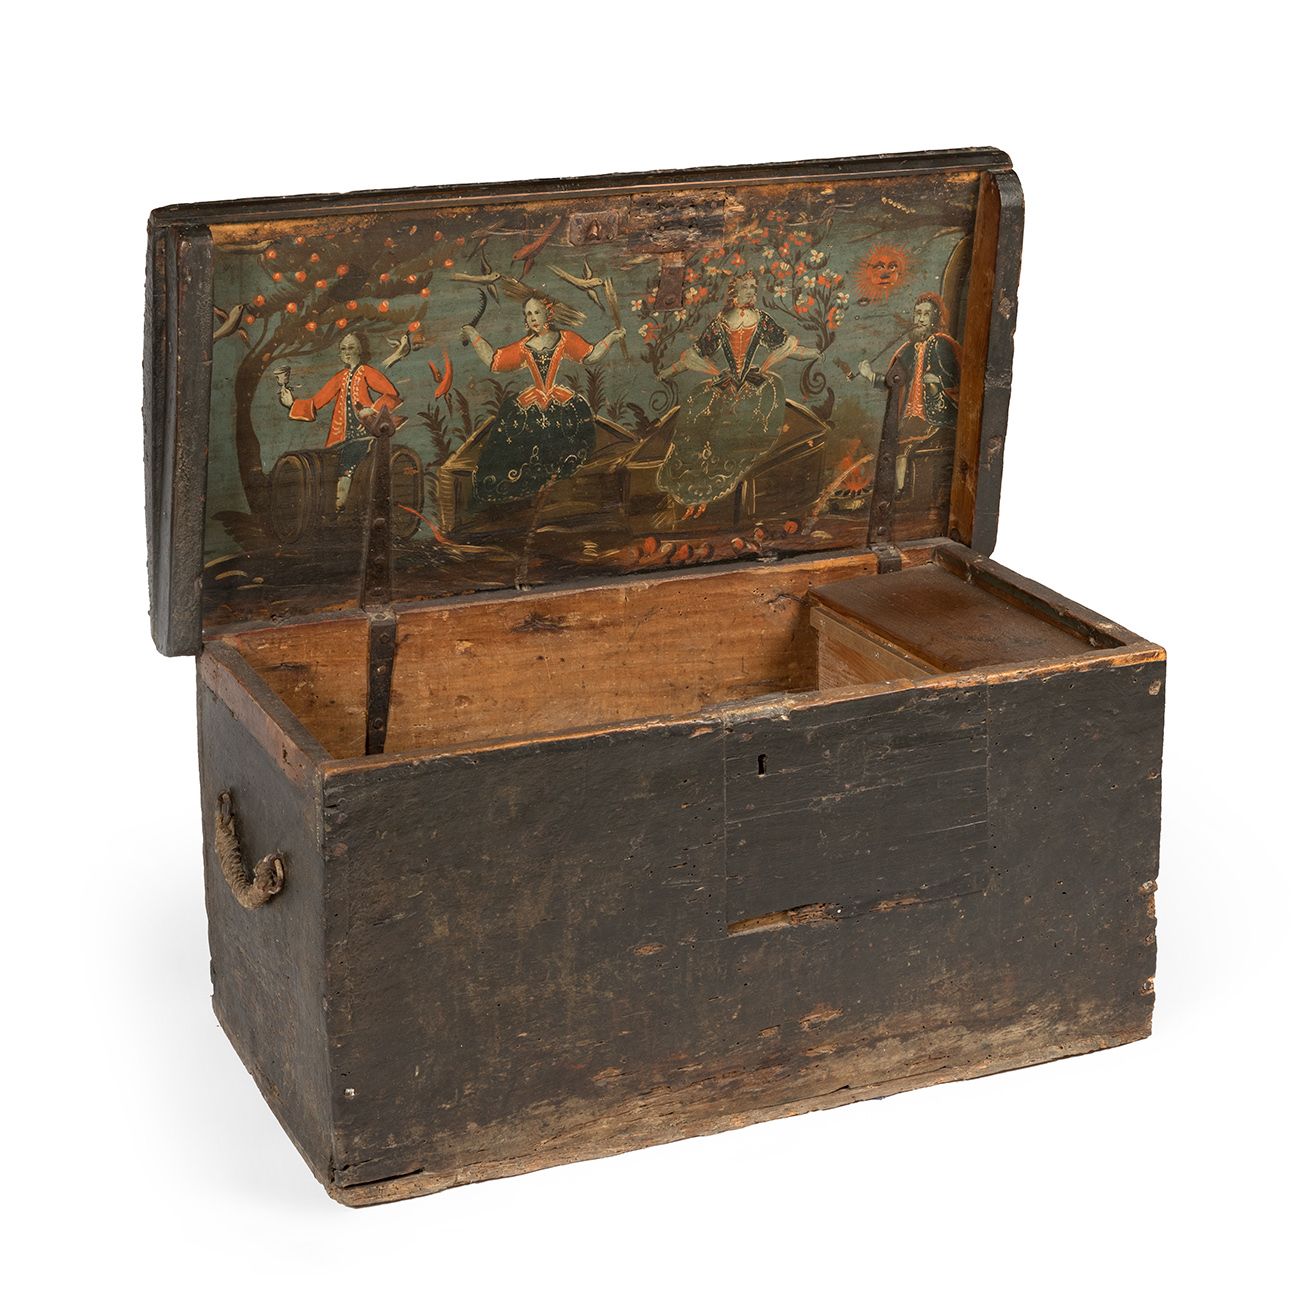 Null A 17th-18th century sailor's chest.
Wood, with polychrome lid inside.
Origi&hellip;